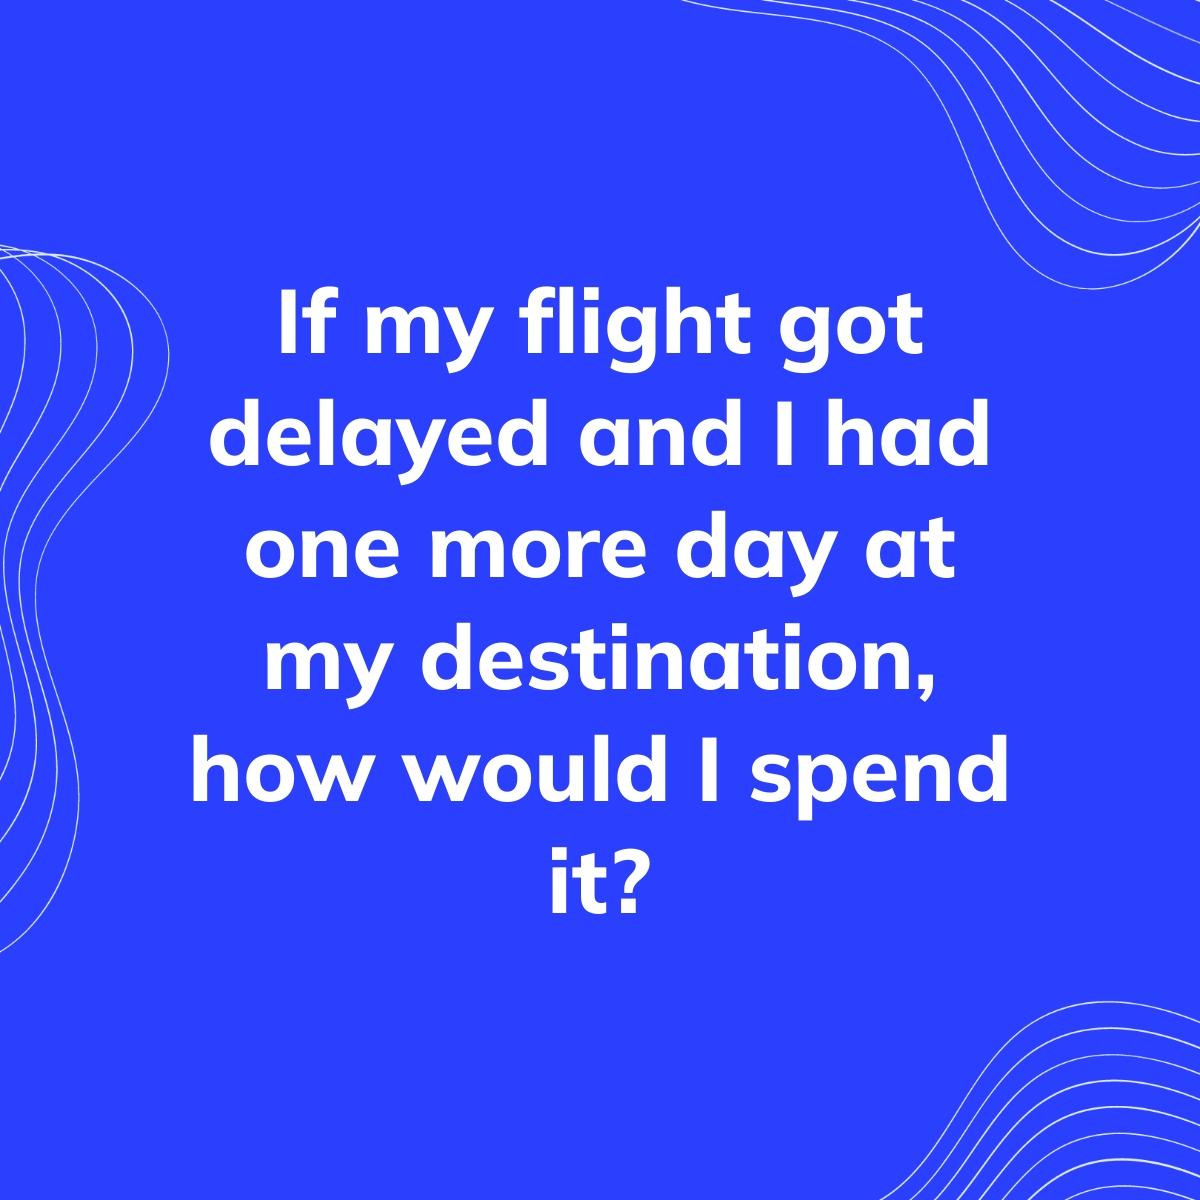 Journal Prompt: If my flight got delayed and I had one more day at my destination, how would I spend it?